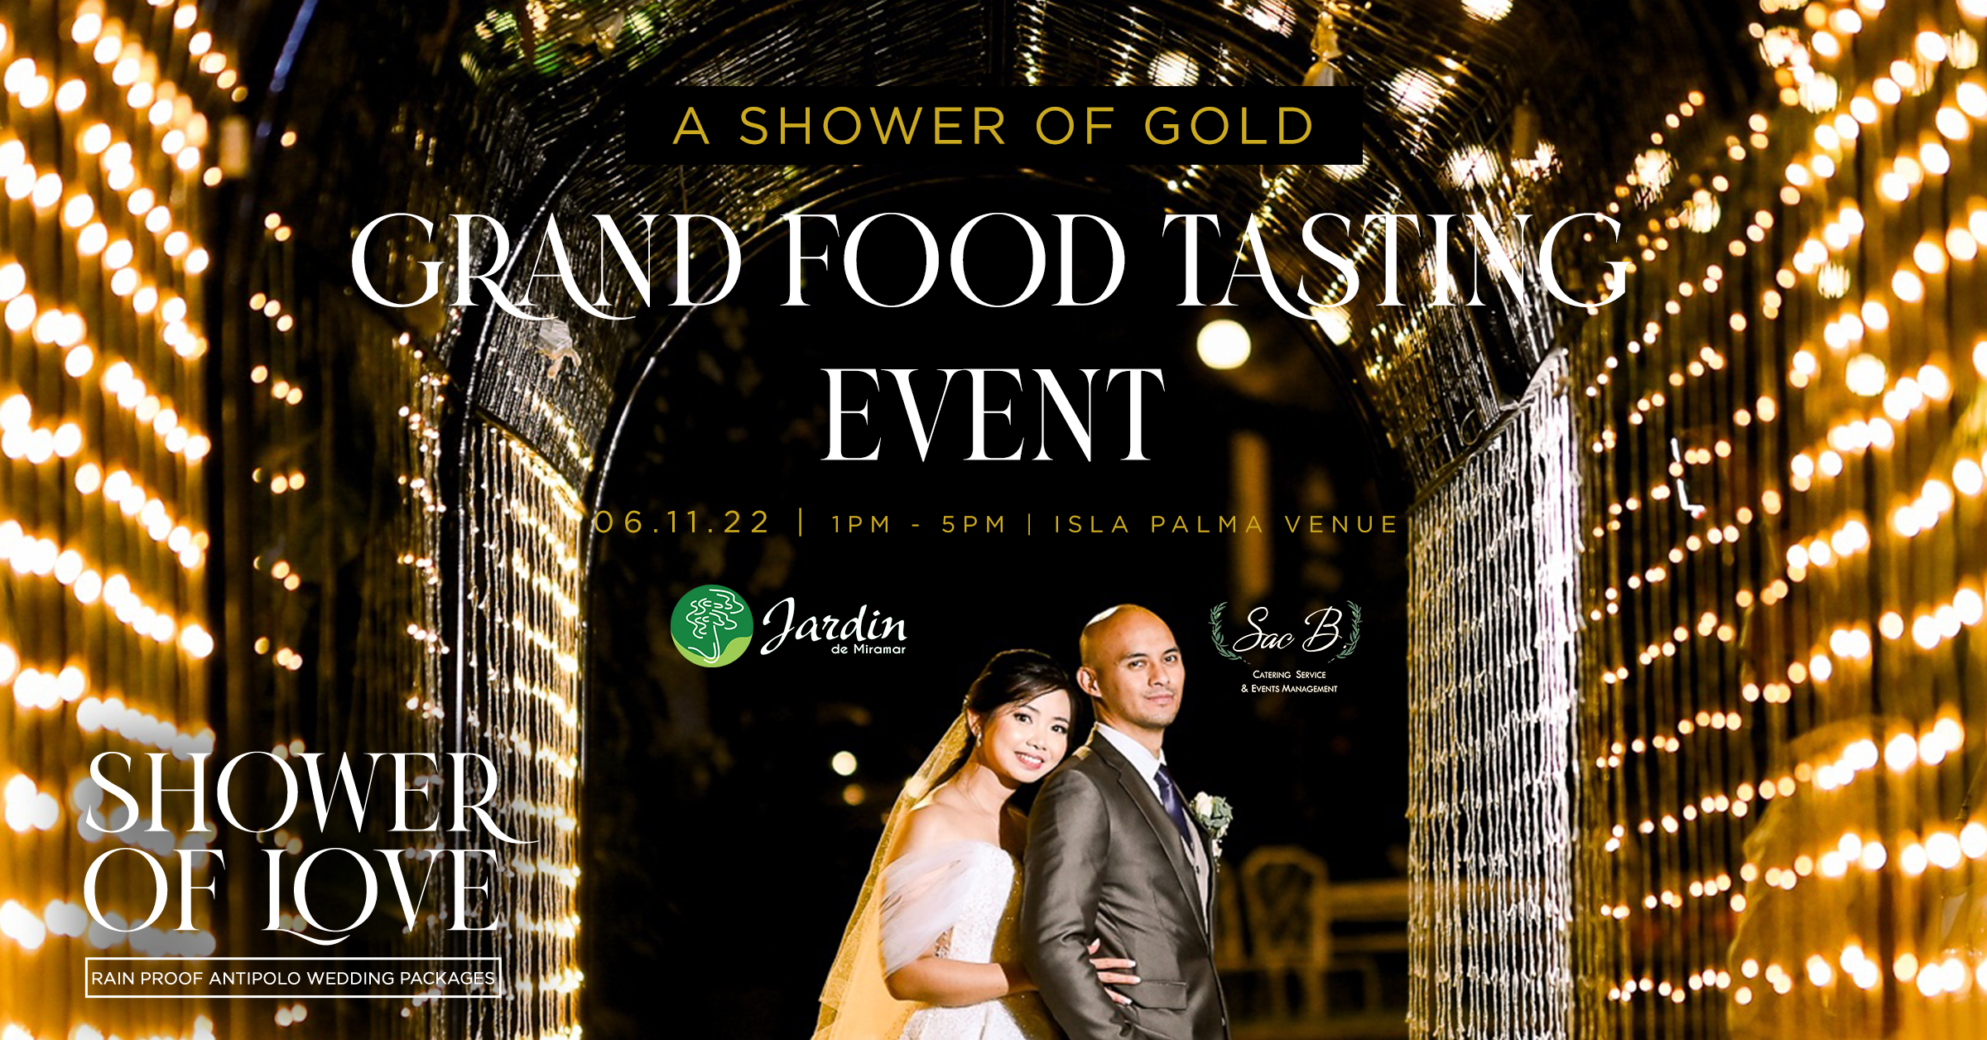 Shower of Gold Grand Food Tasting Event by Sac B Catering